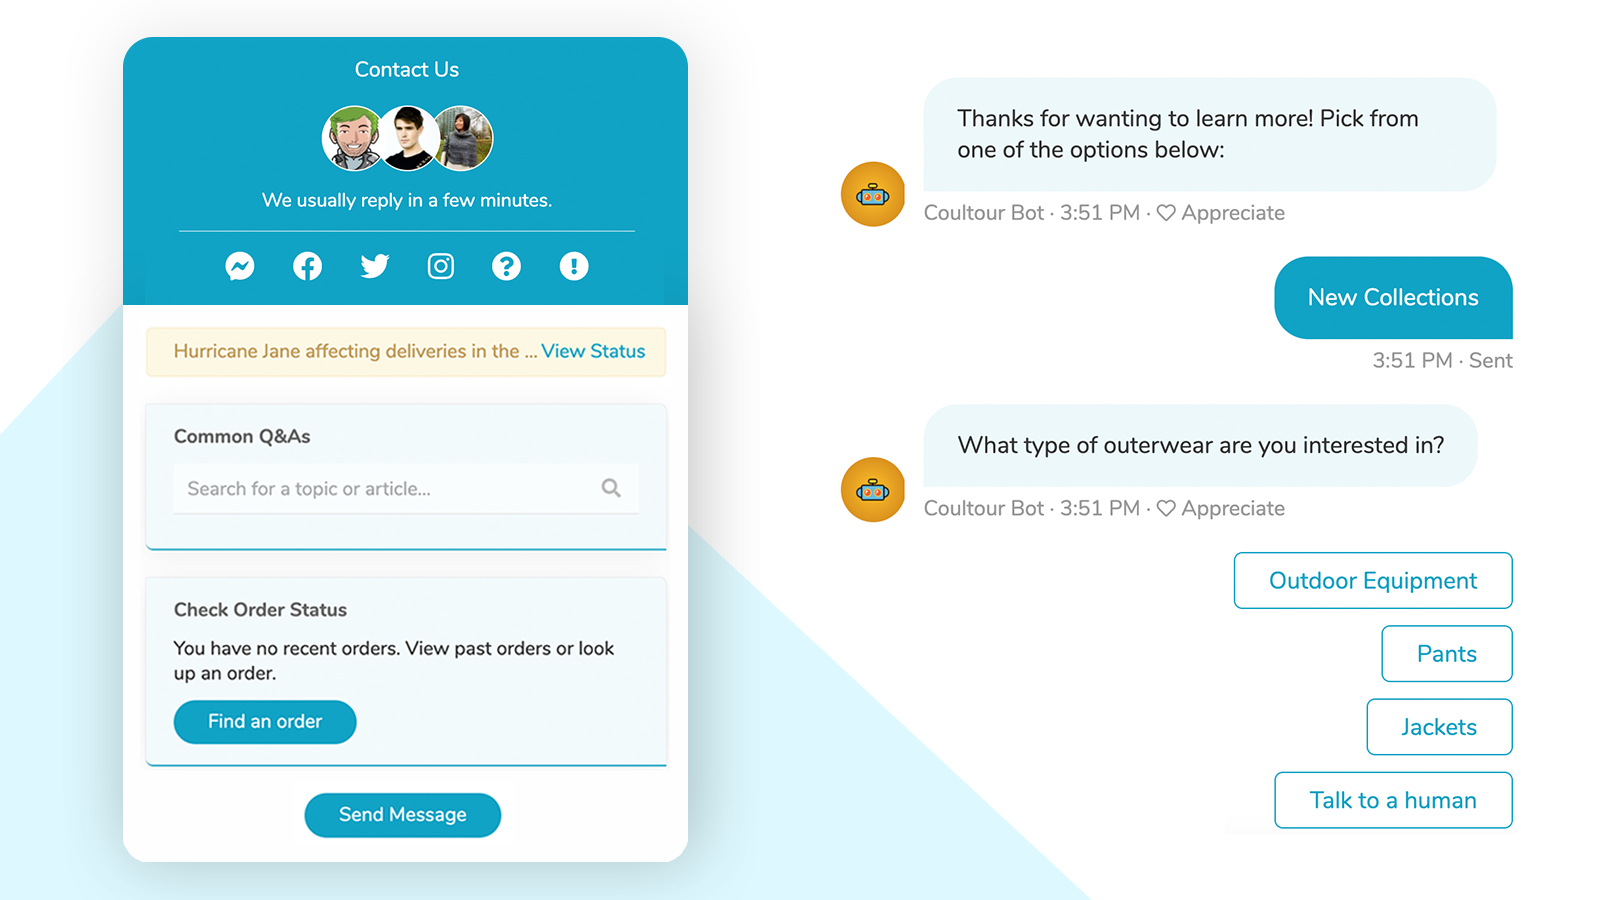 Powerful live chat and chatbots designed for eCommerce.